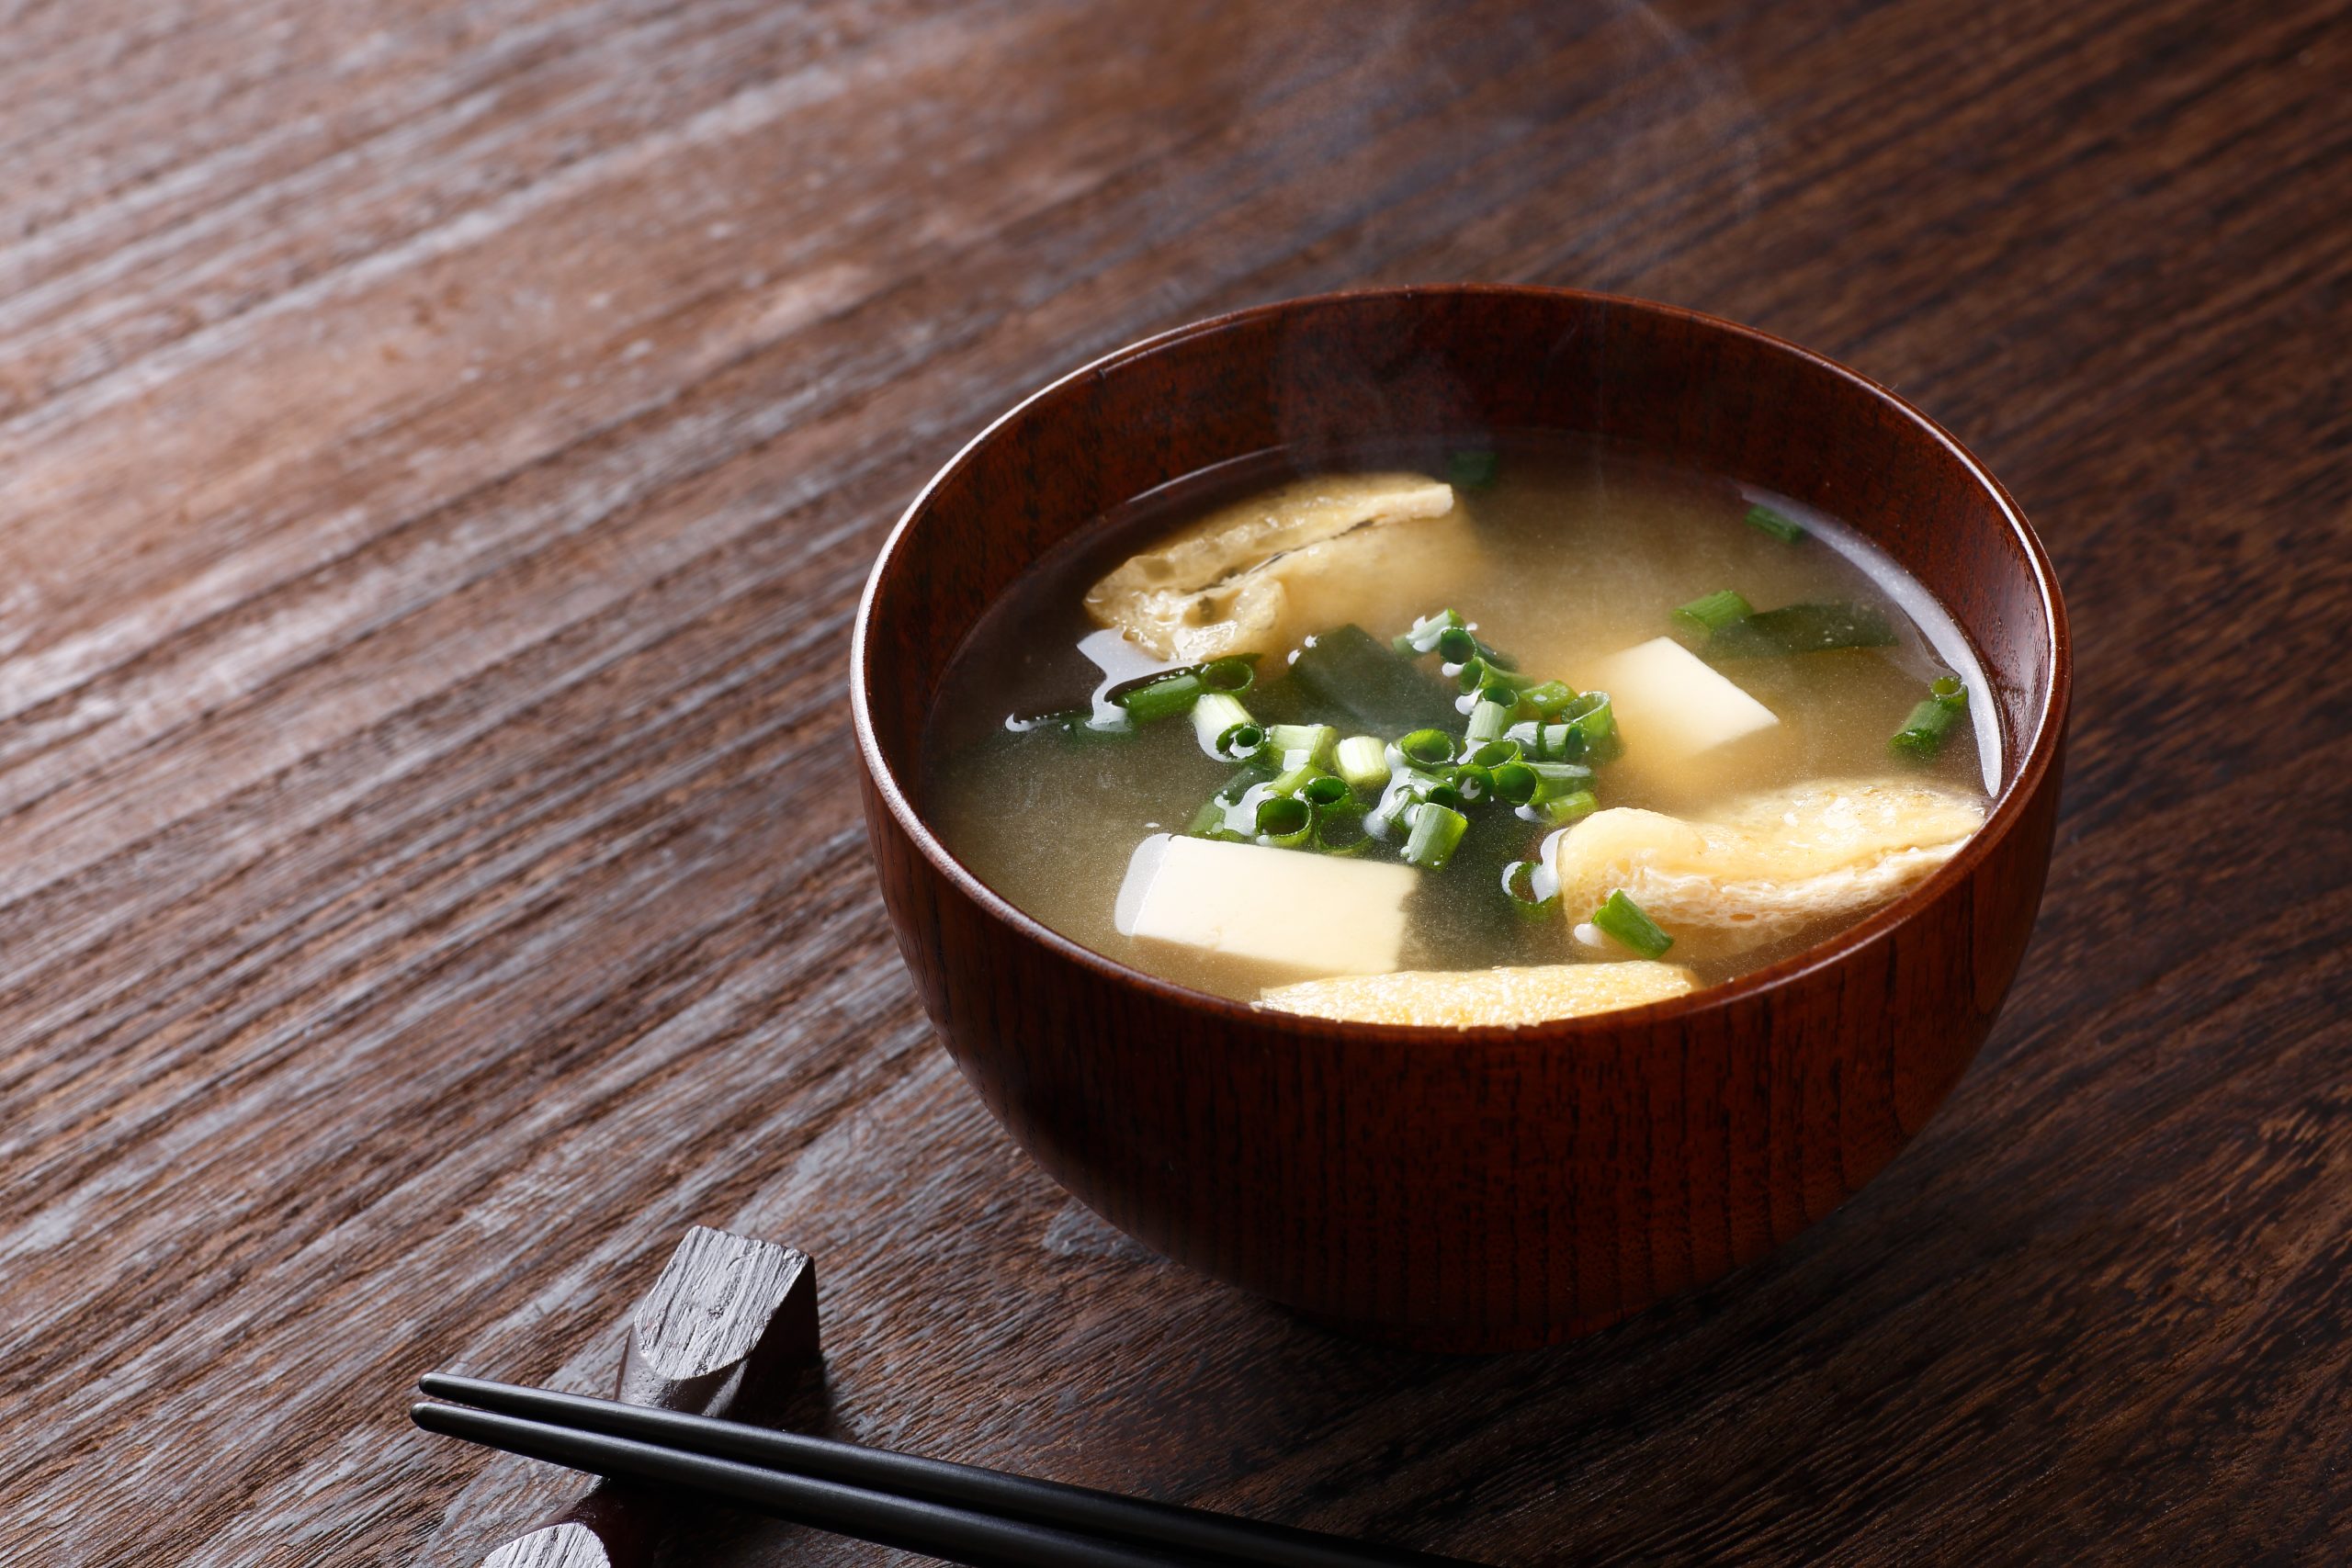 This is a photograph of Miso soup